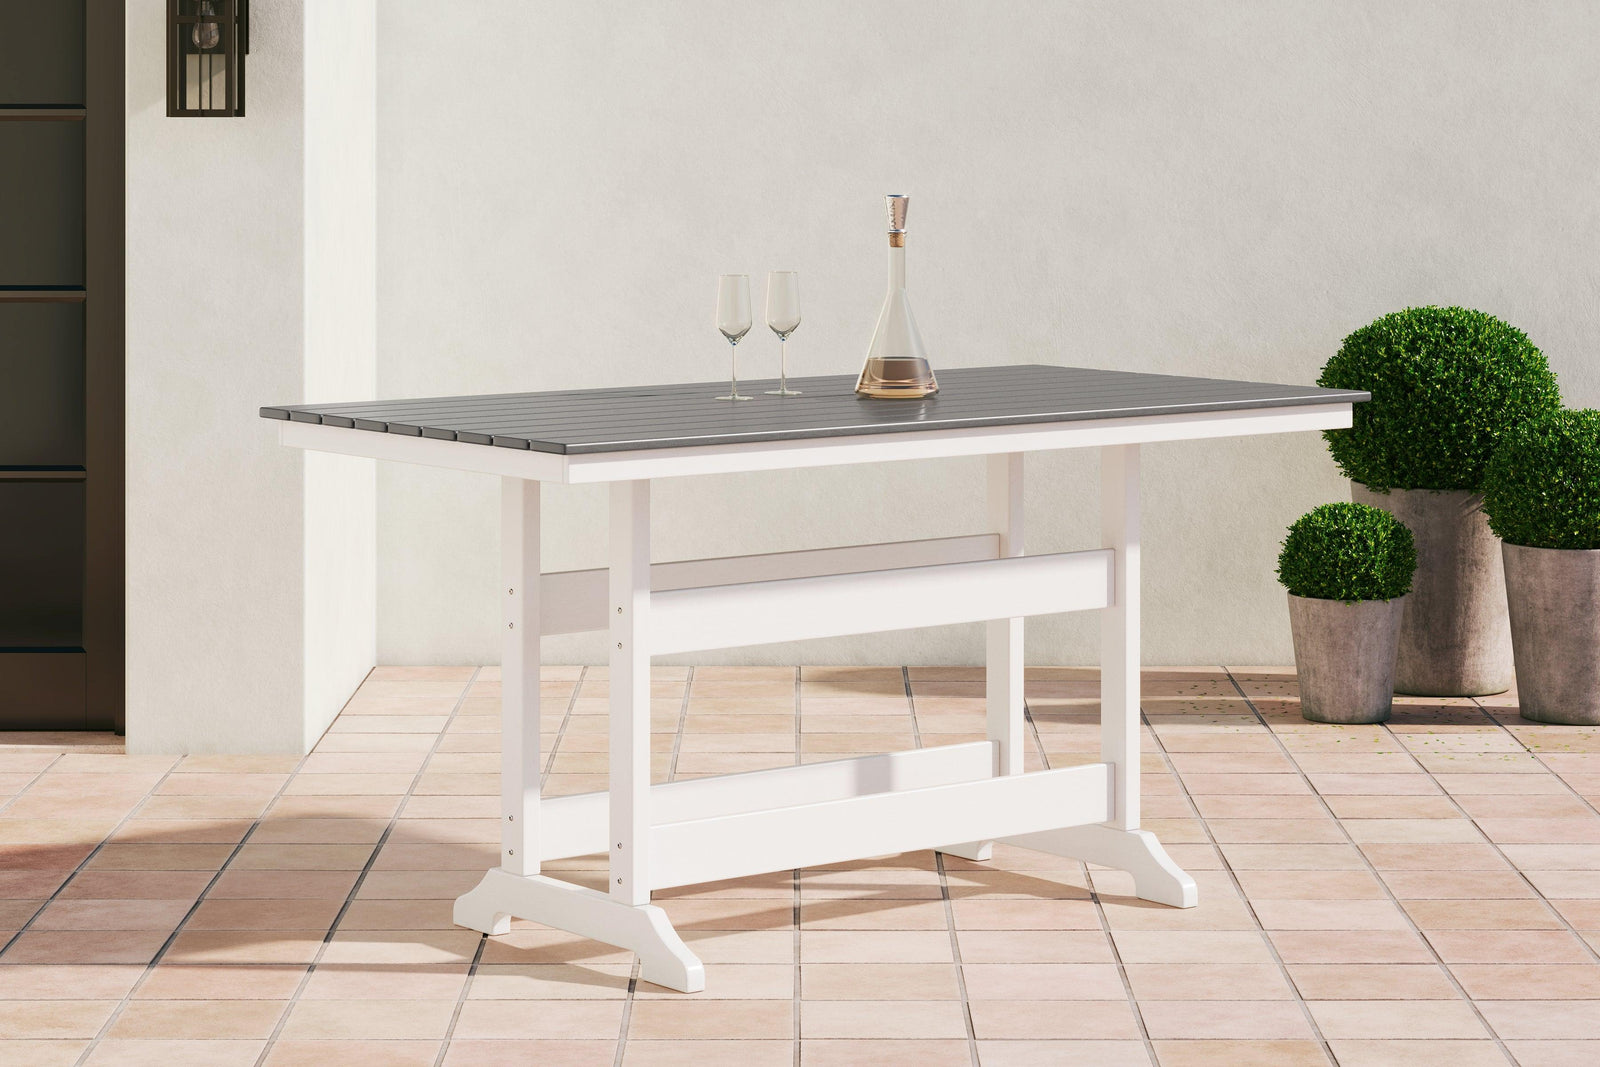 Transville Gray/white Outdoor Counter Height Dining Table P210-642 - Ella Furniture